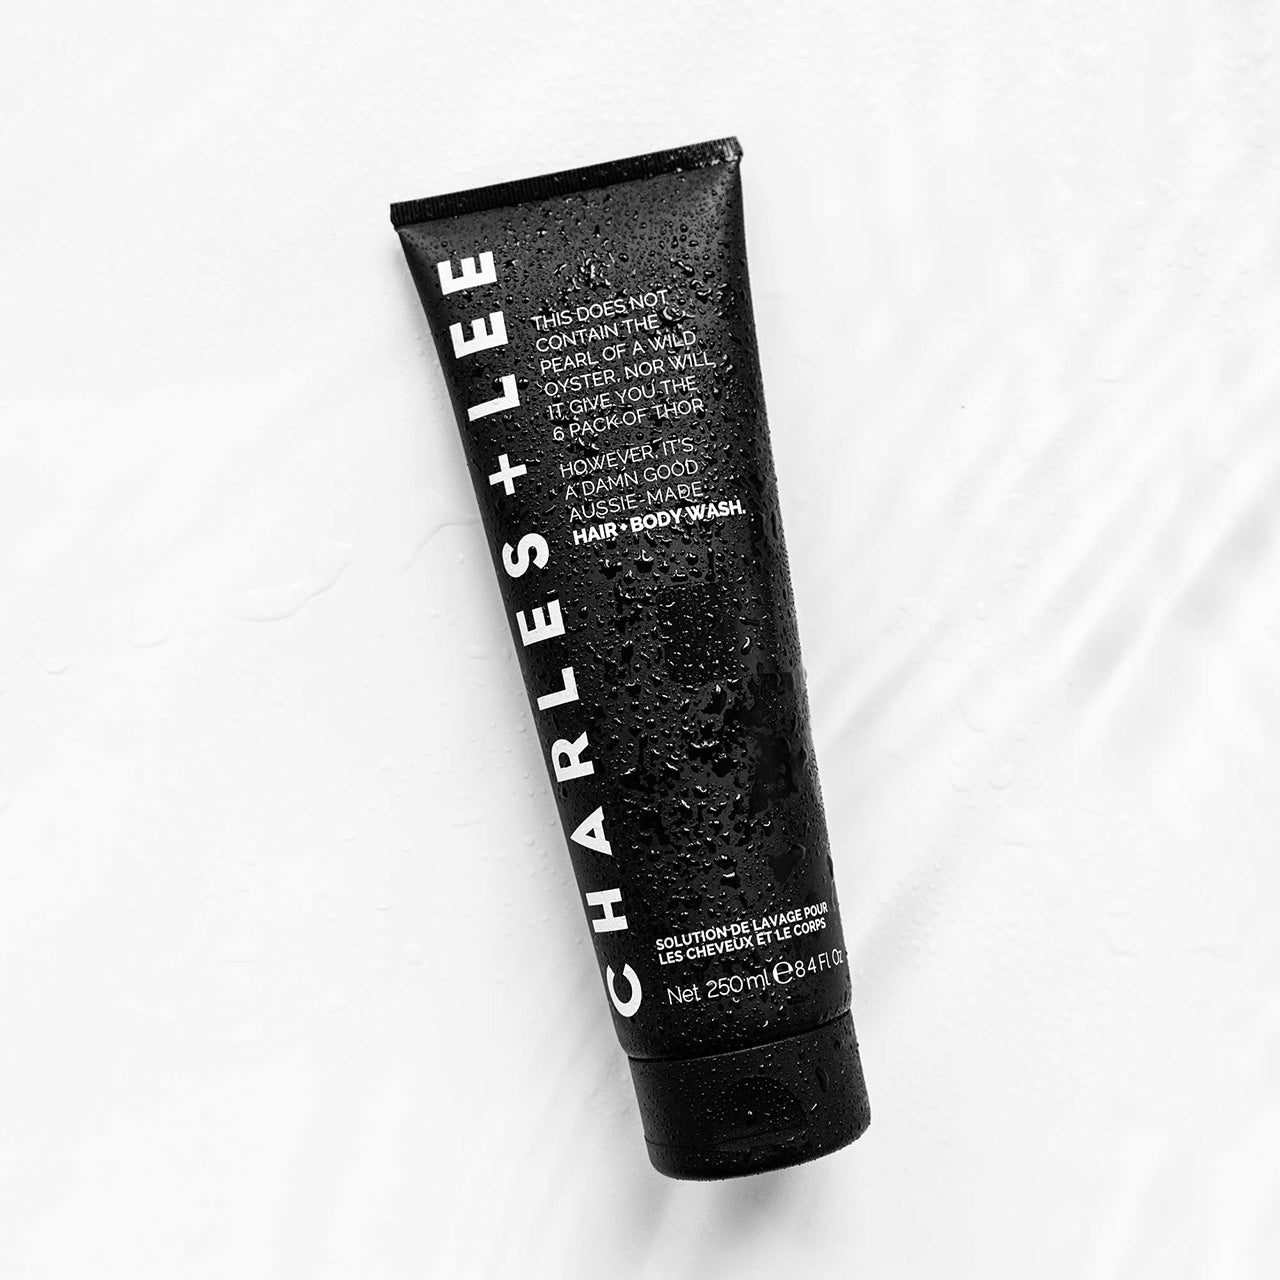 Charles and Lee black tube of Hair and Body Wash 250ml